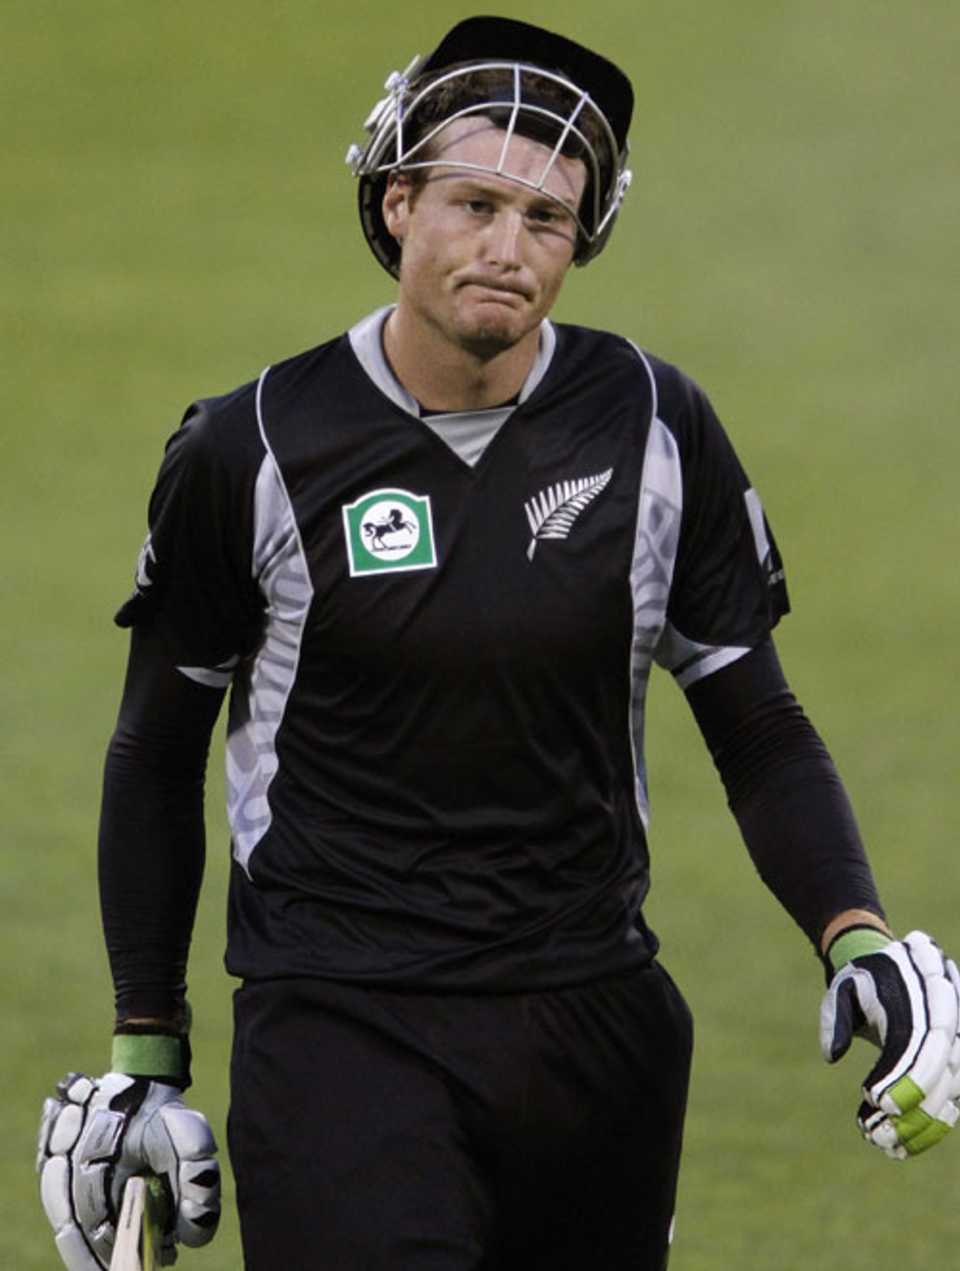 Martin Guptill trudges off after missing out on a century, New Zealand v Bangladesh, 3rd ODI, Christchurch, February 11, 2010